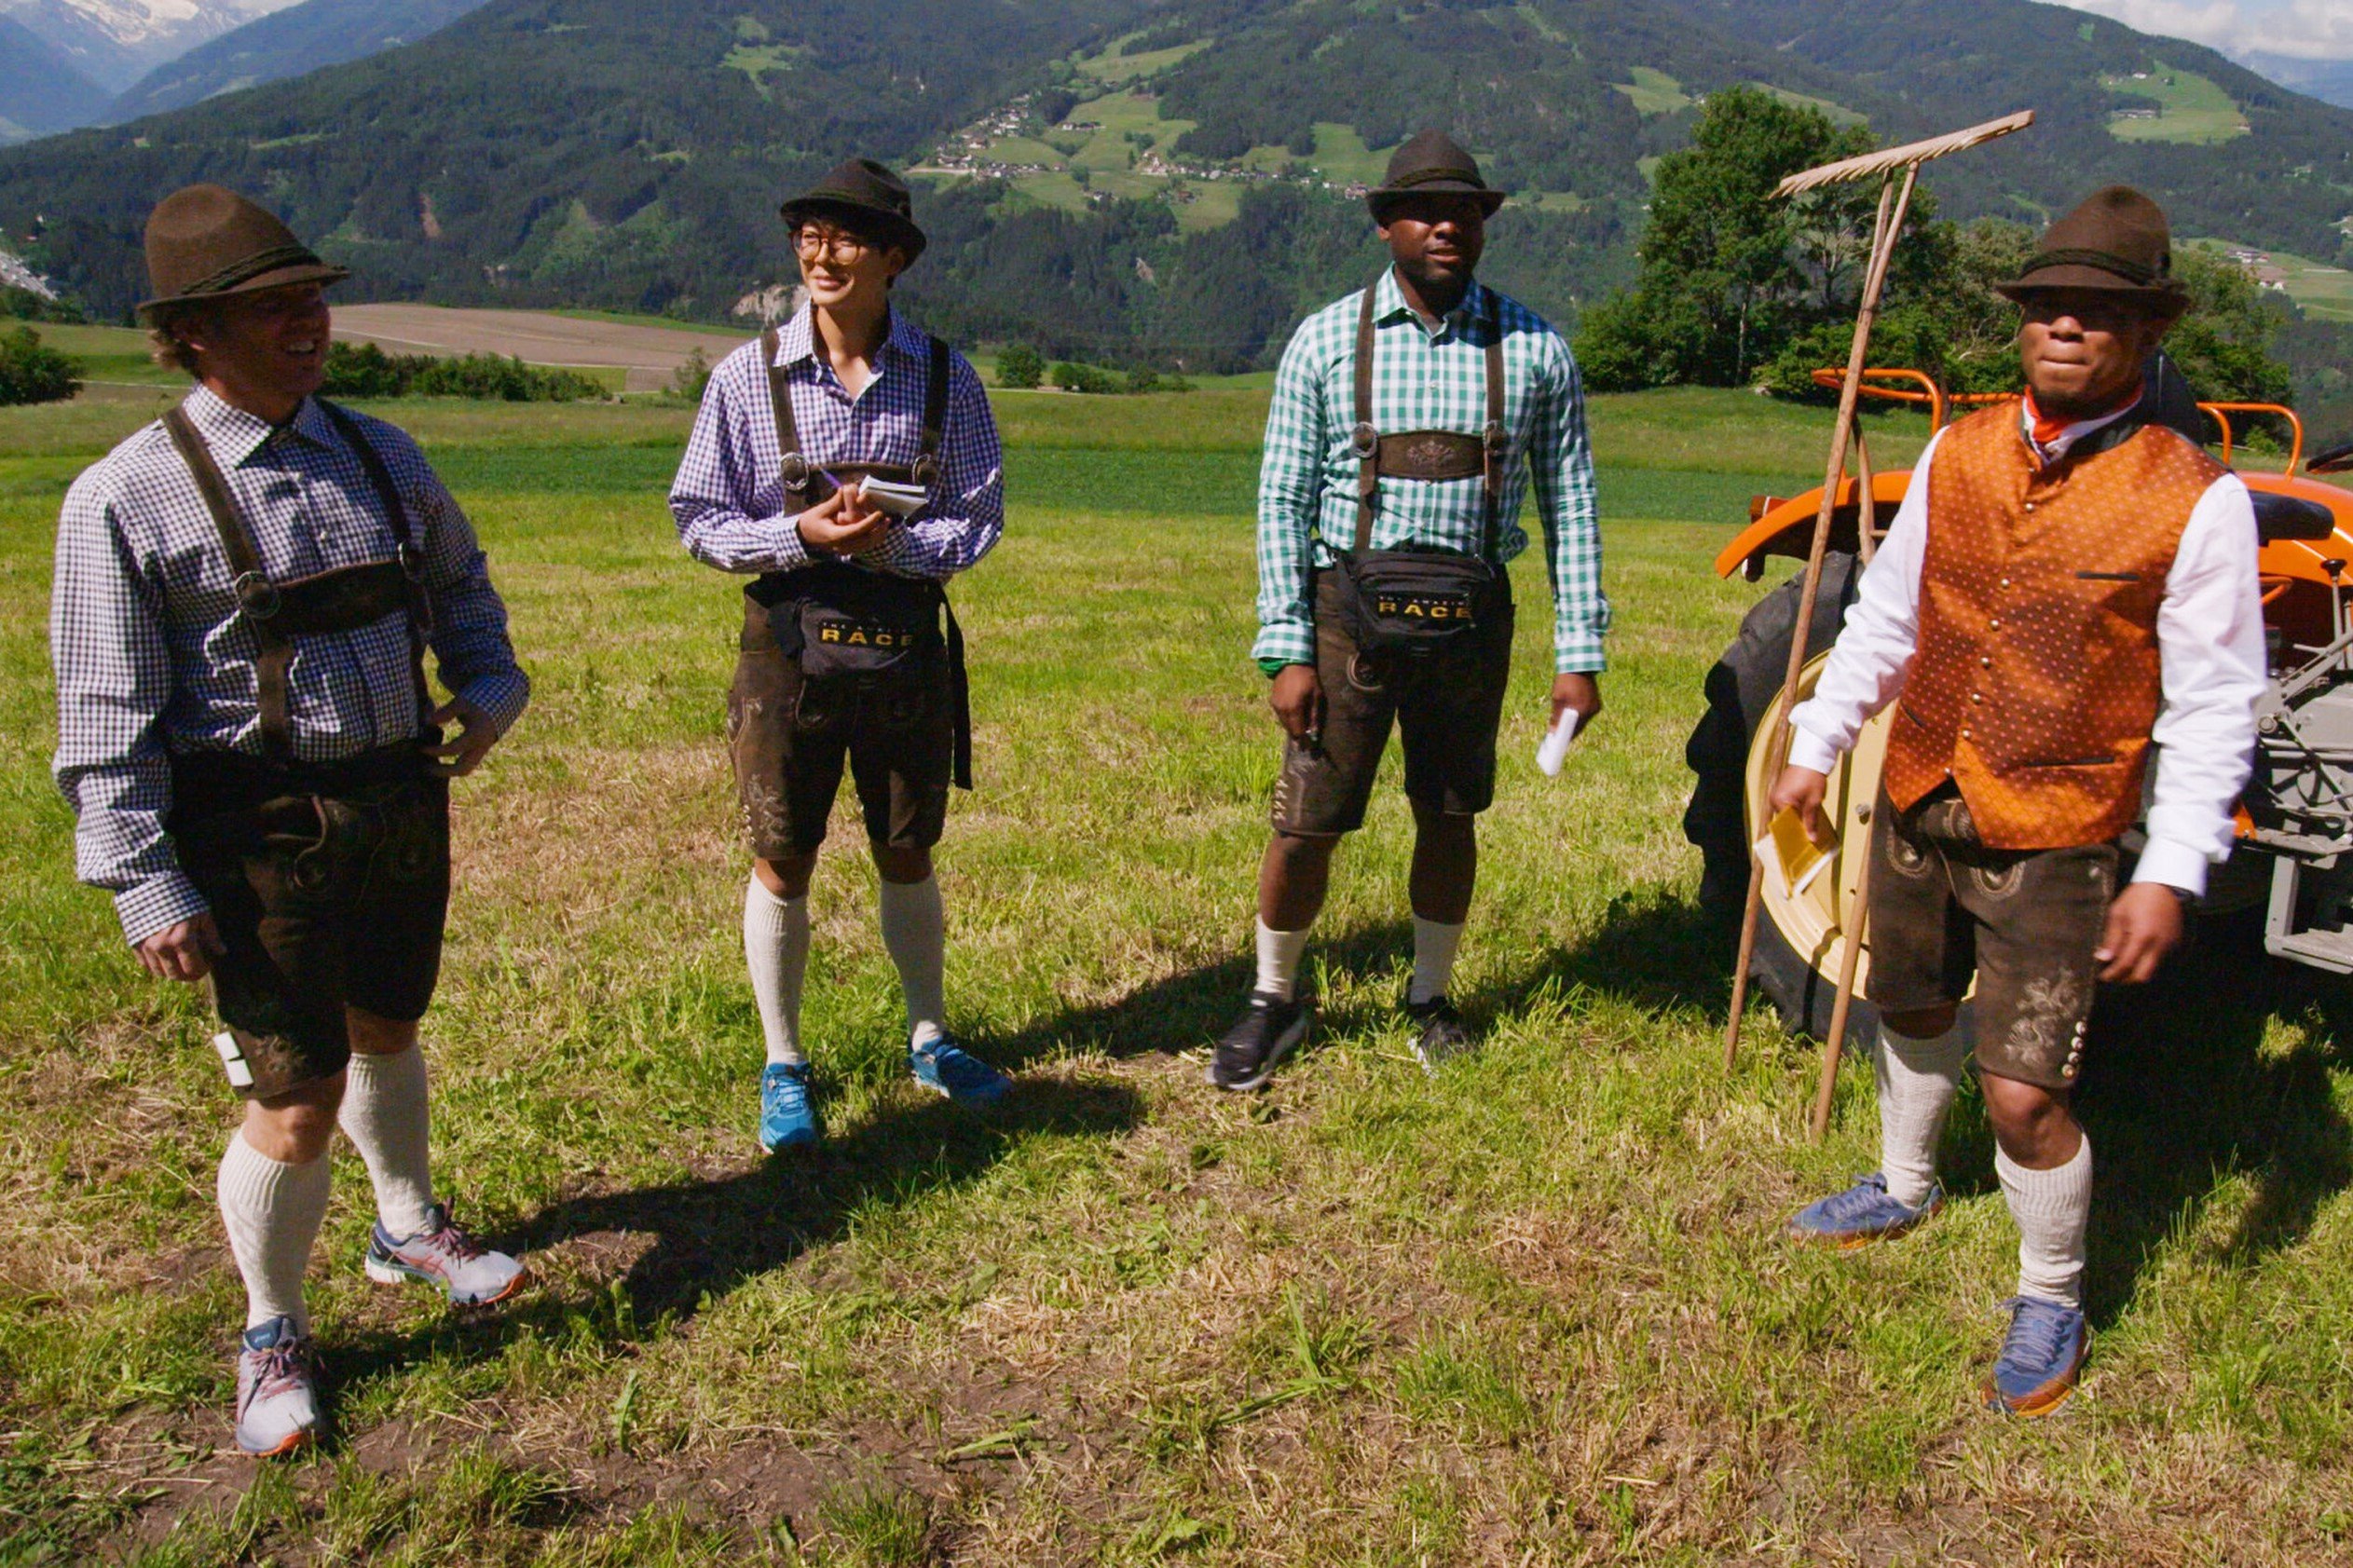 Tim Mann, Derek Xiao, Marcus Craig, and Lumumba Roberts, who compete in ' The Amazing Race' Season 34 on CBS, are surrounded by mountains in Austria, wearing